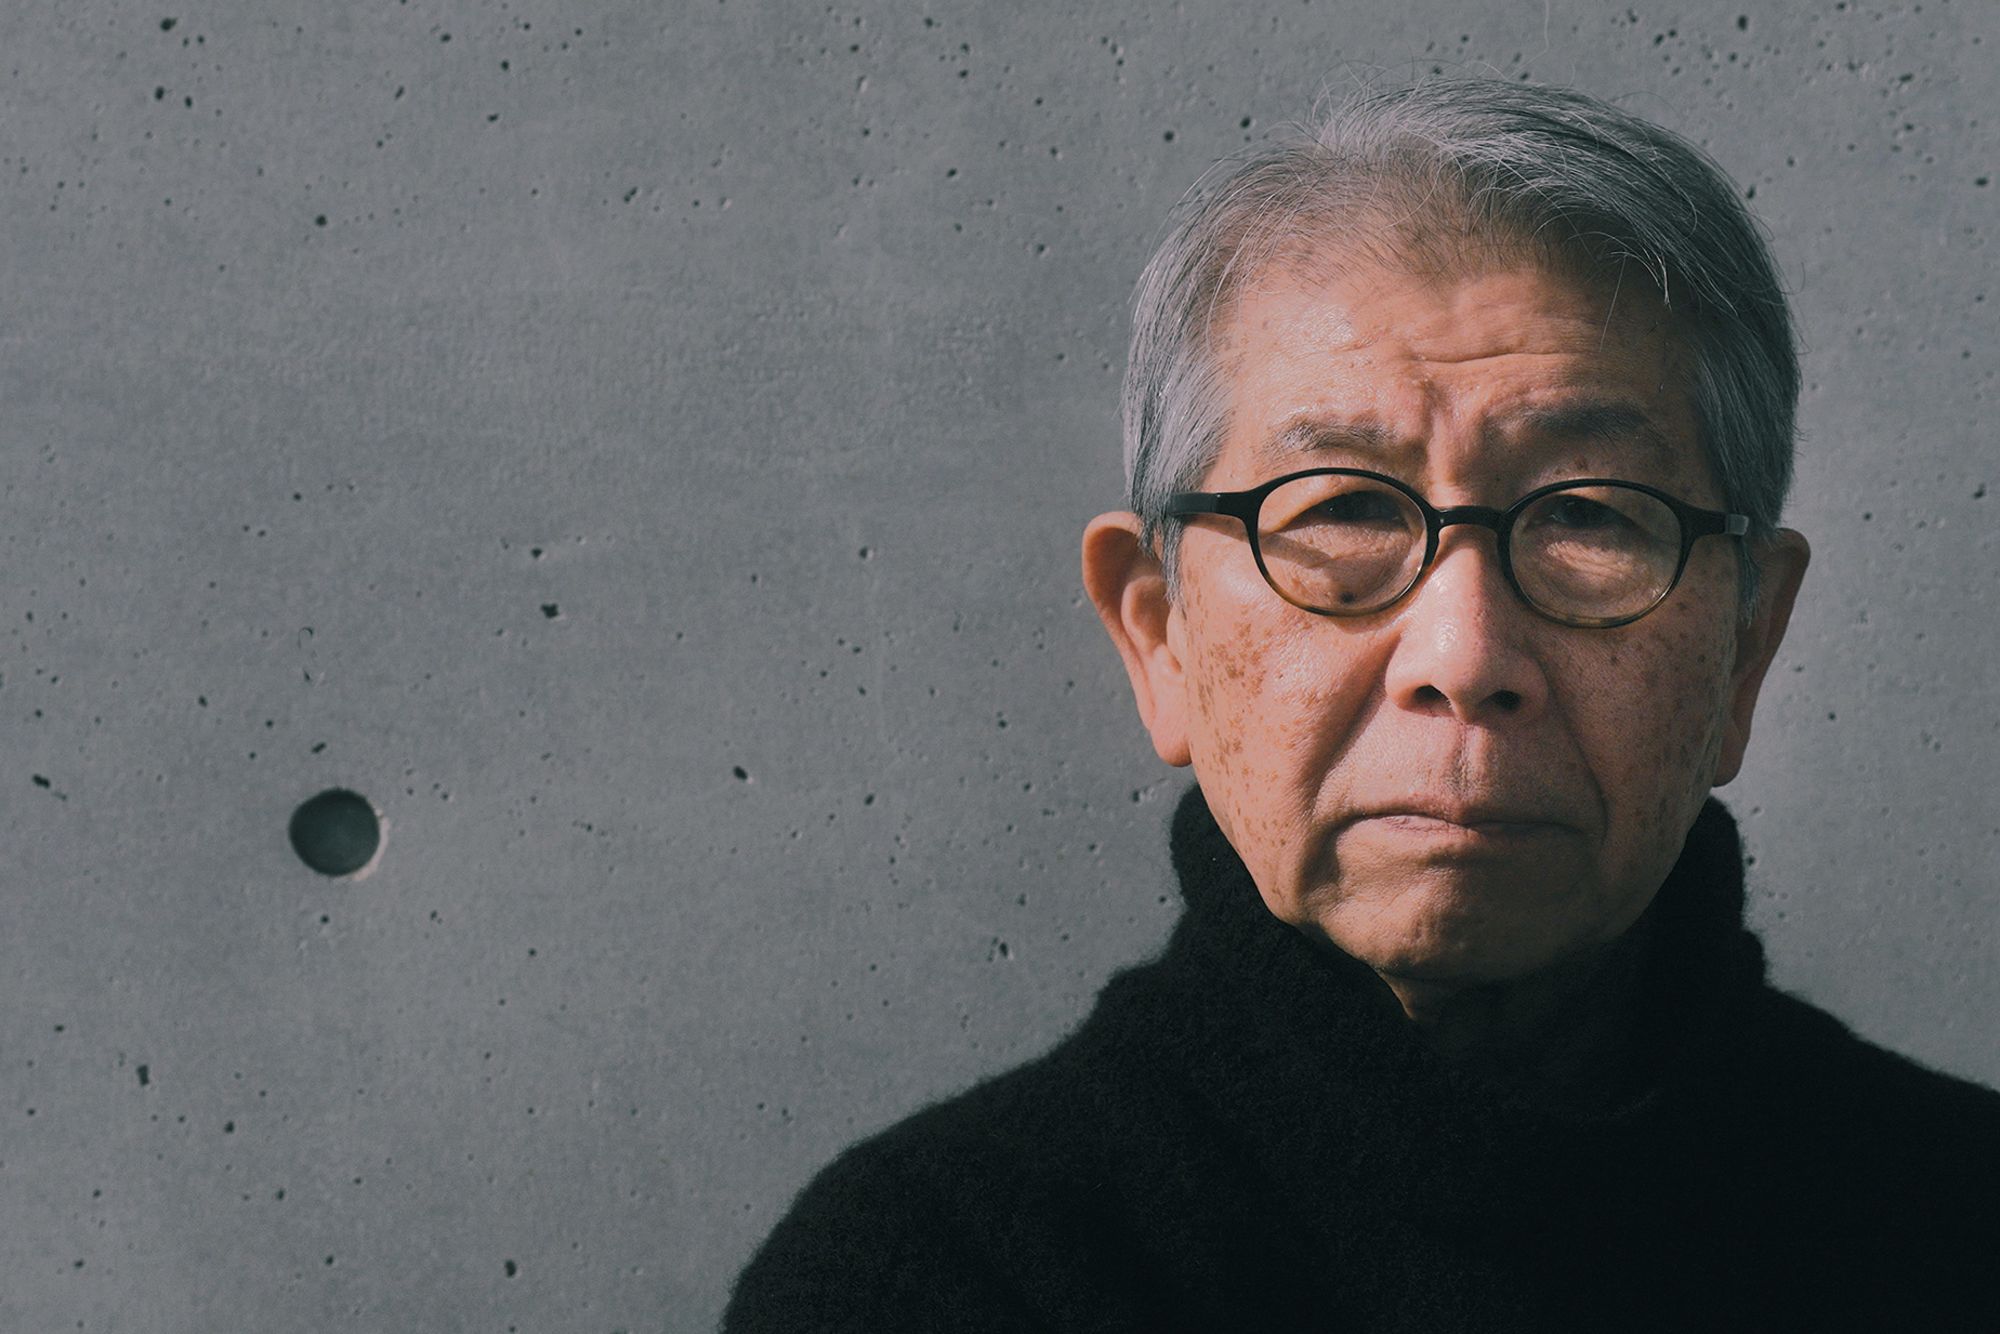 Riken Yamamoto has been awarded the 2024 Pritzker Prize for “blurring boundaries between (architecture's) public and private dimensions,” the jury said.